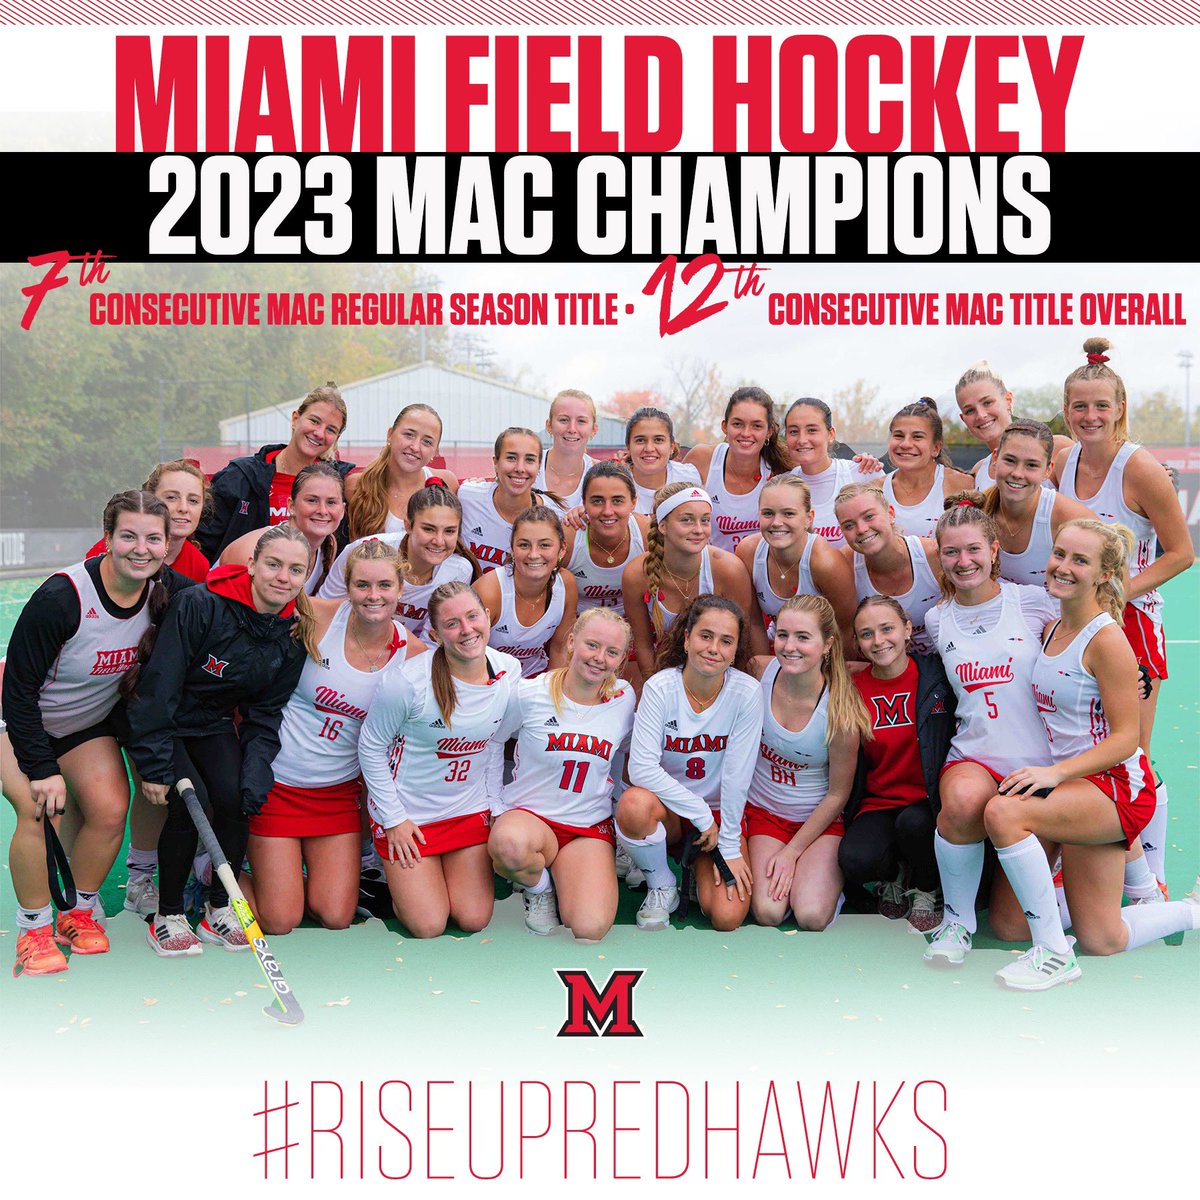 So excited!! Today we won our 7th consecutive MAC regular season title and added on to our MAC record of 12 consecutive MAC championships! #RiseUpRedHawks #GraduatingChampions